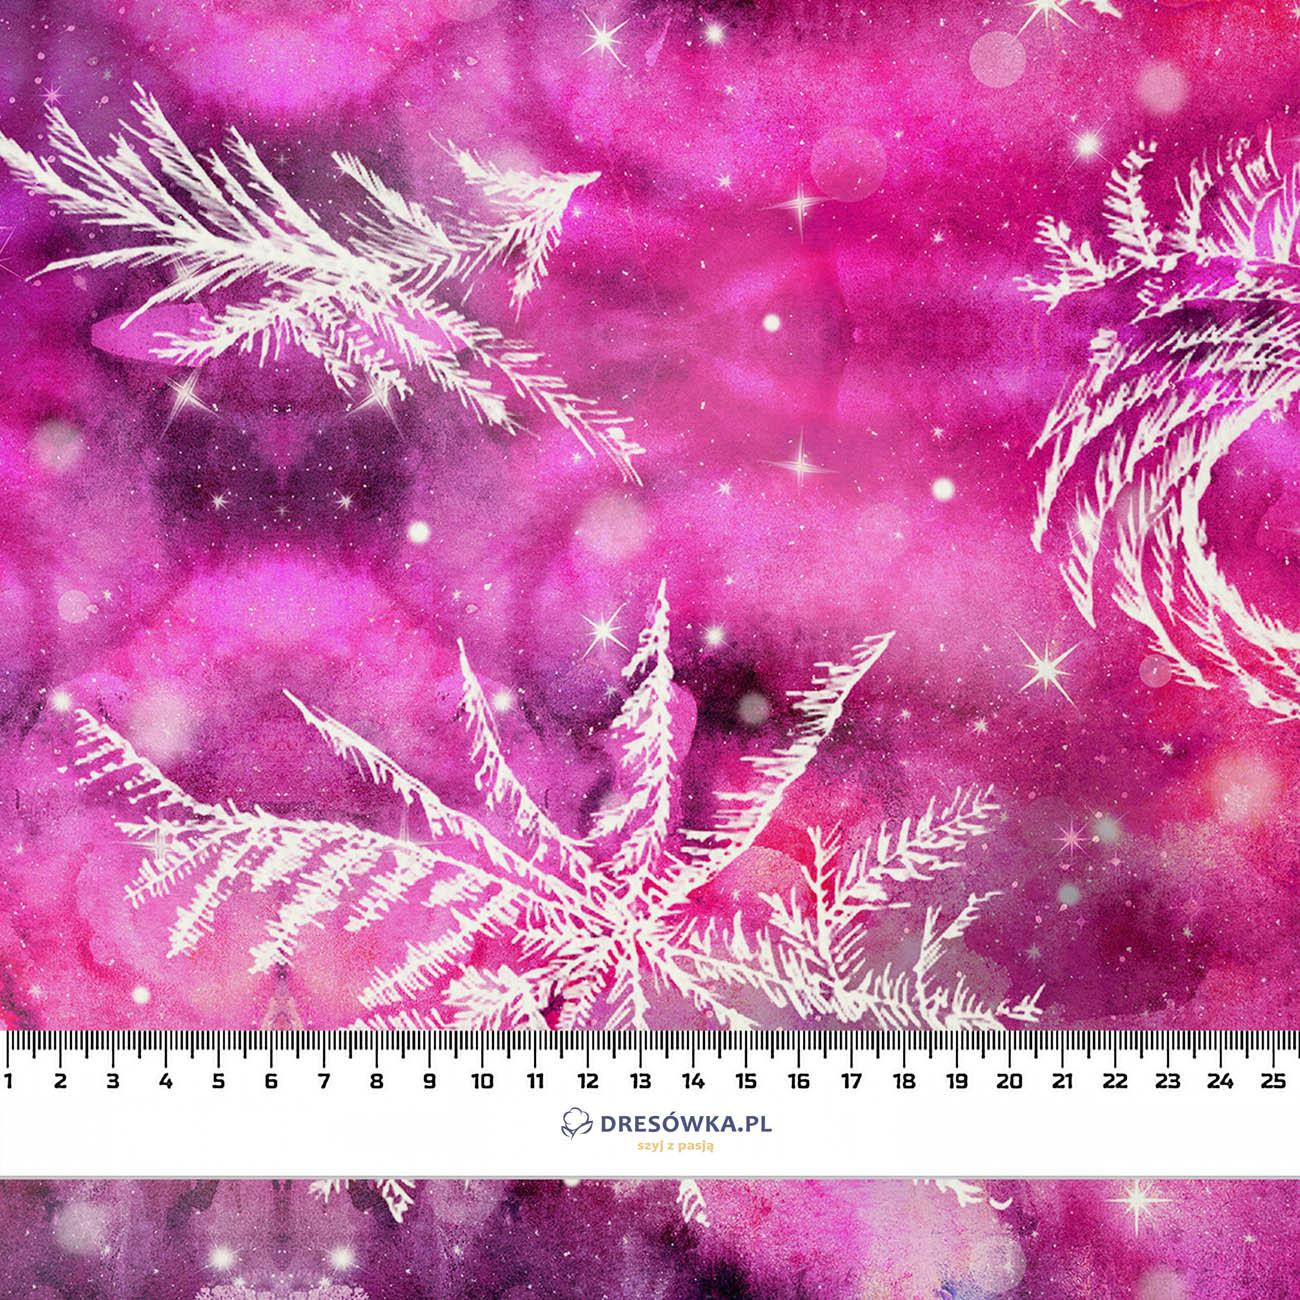 WINTER GALAXY PAT. 1 - Woven Fabric for tablecloths